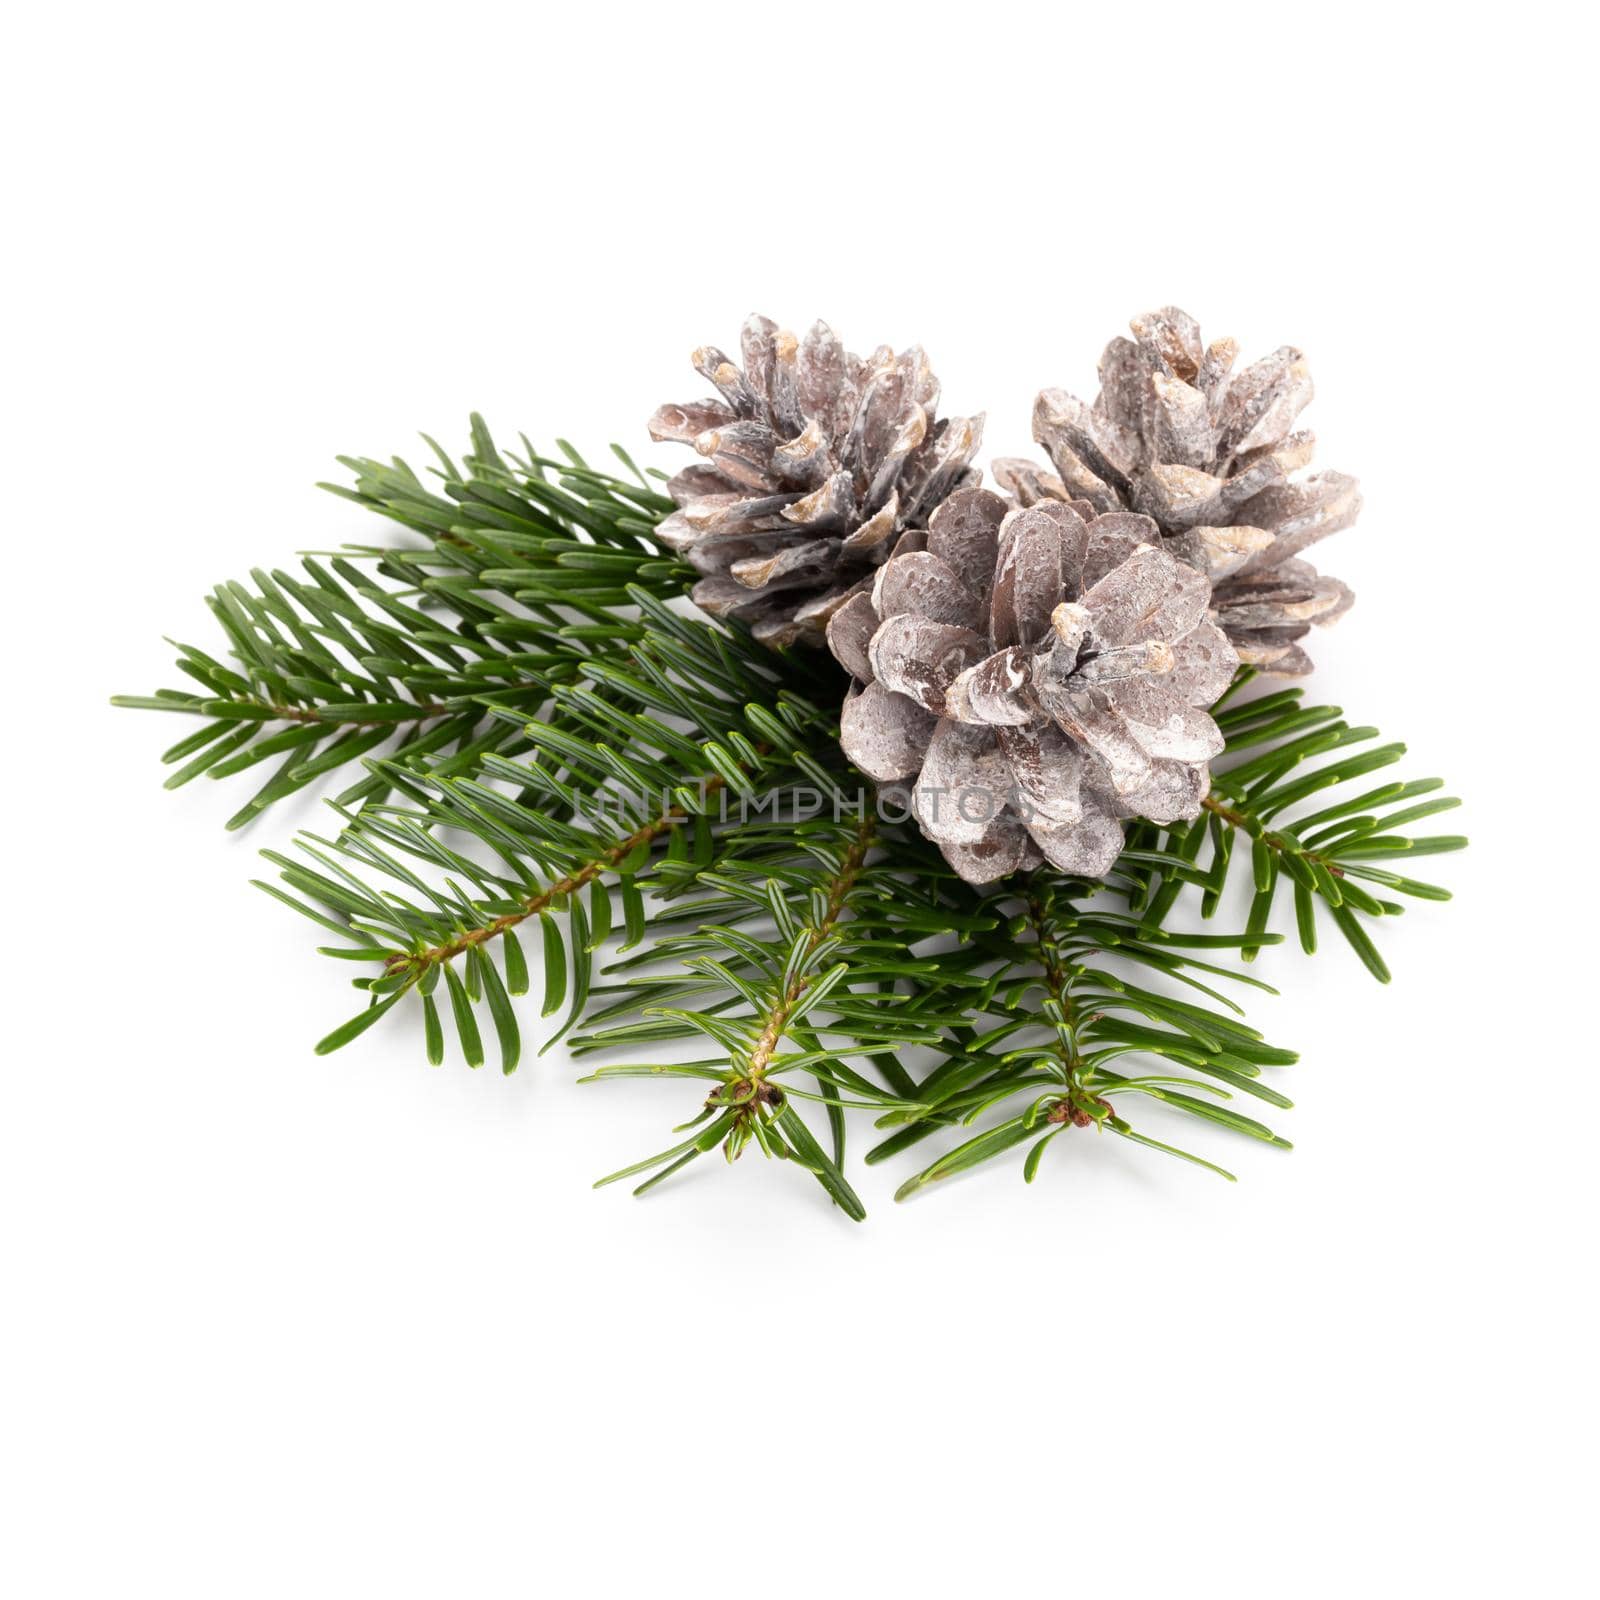 Pine cones and fir tree branch on a white background. by gitusik